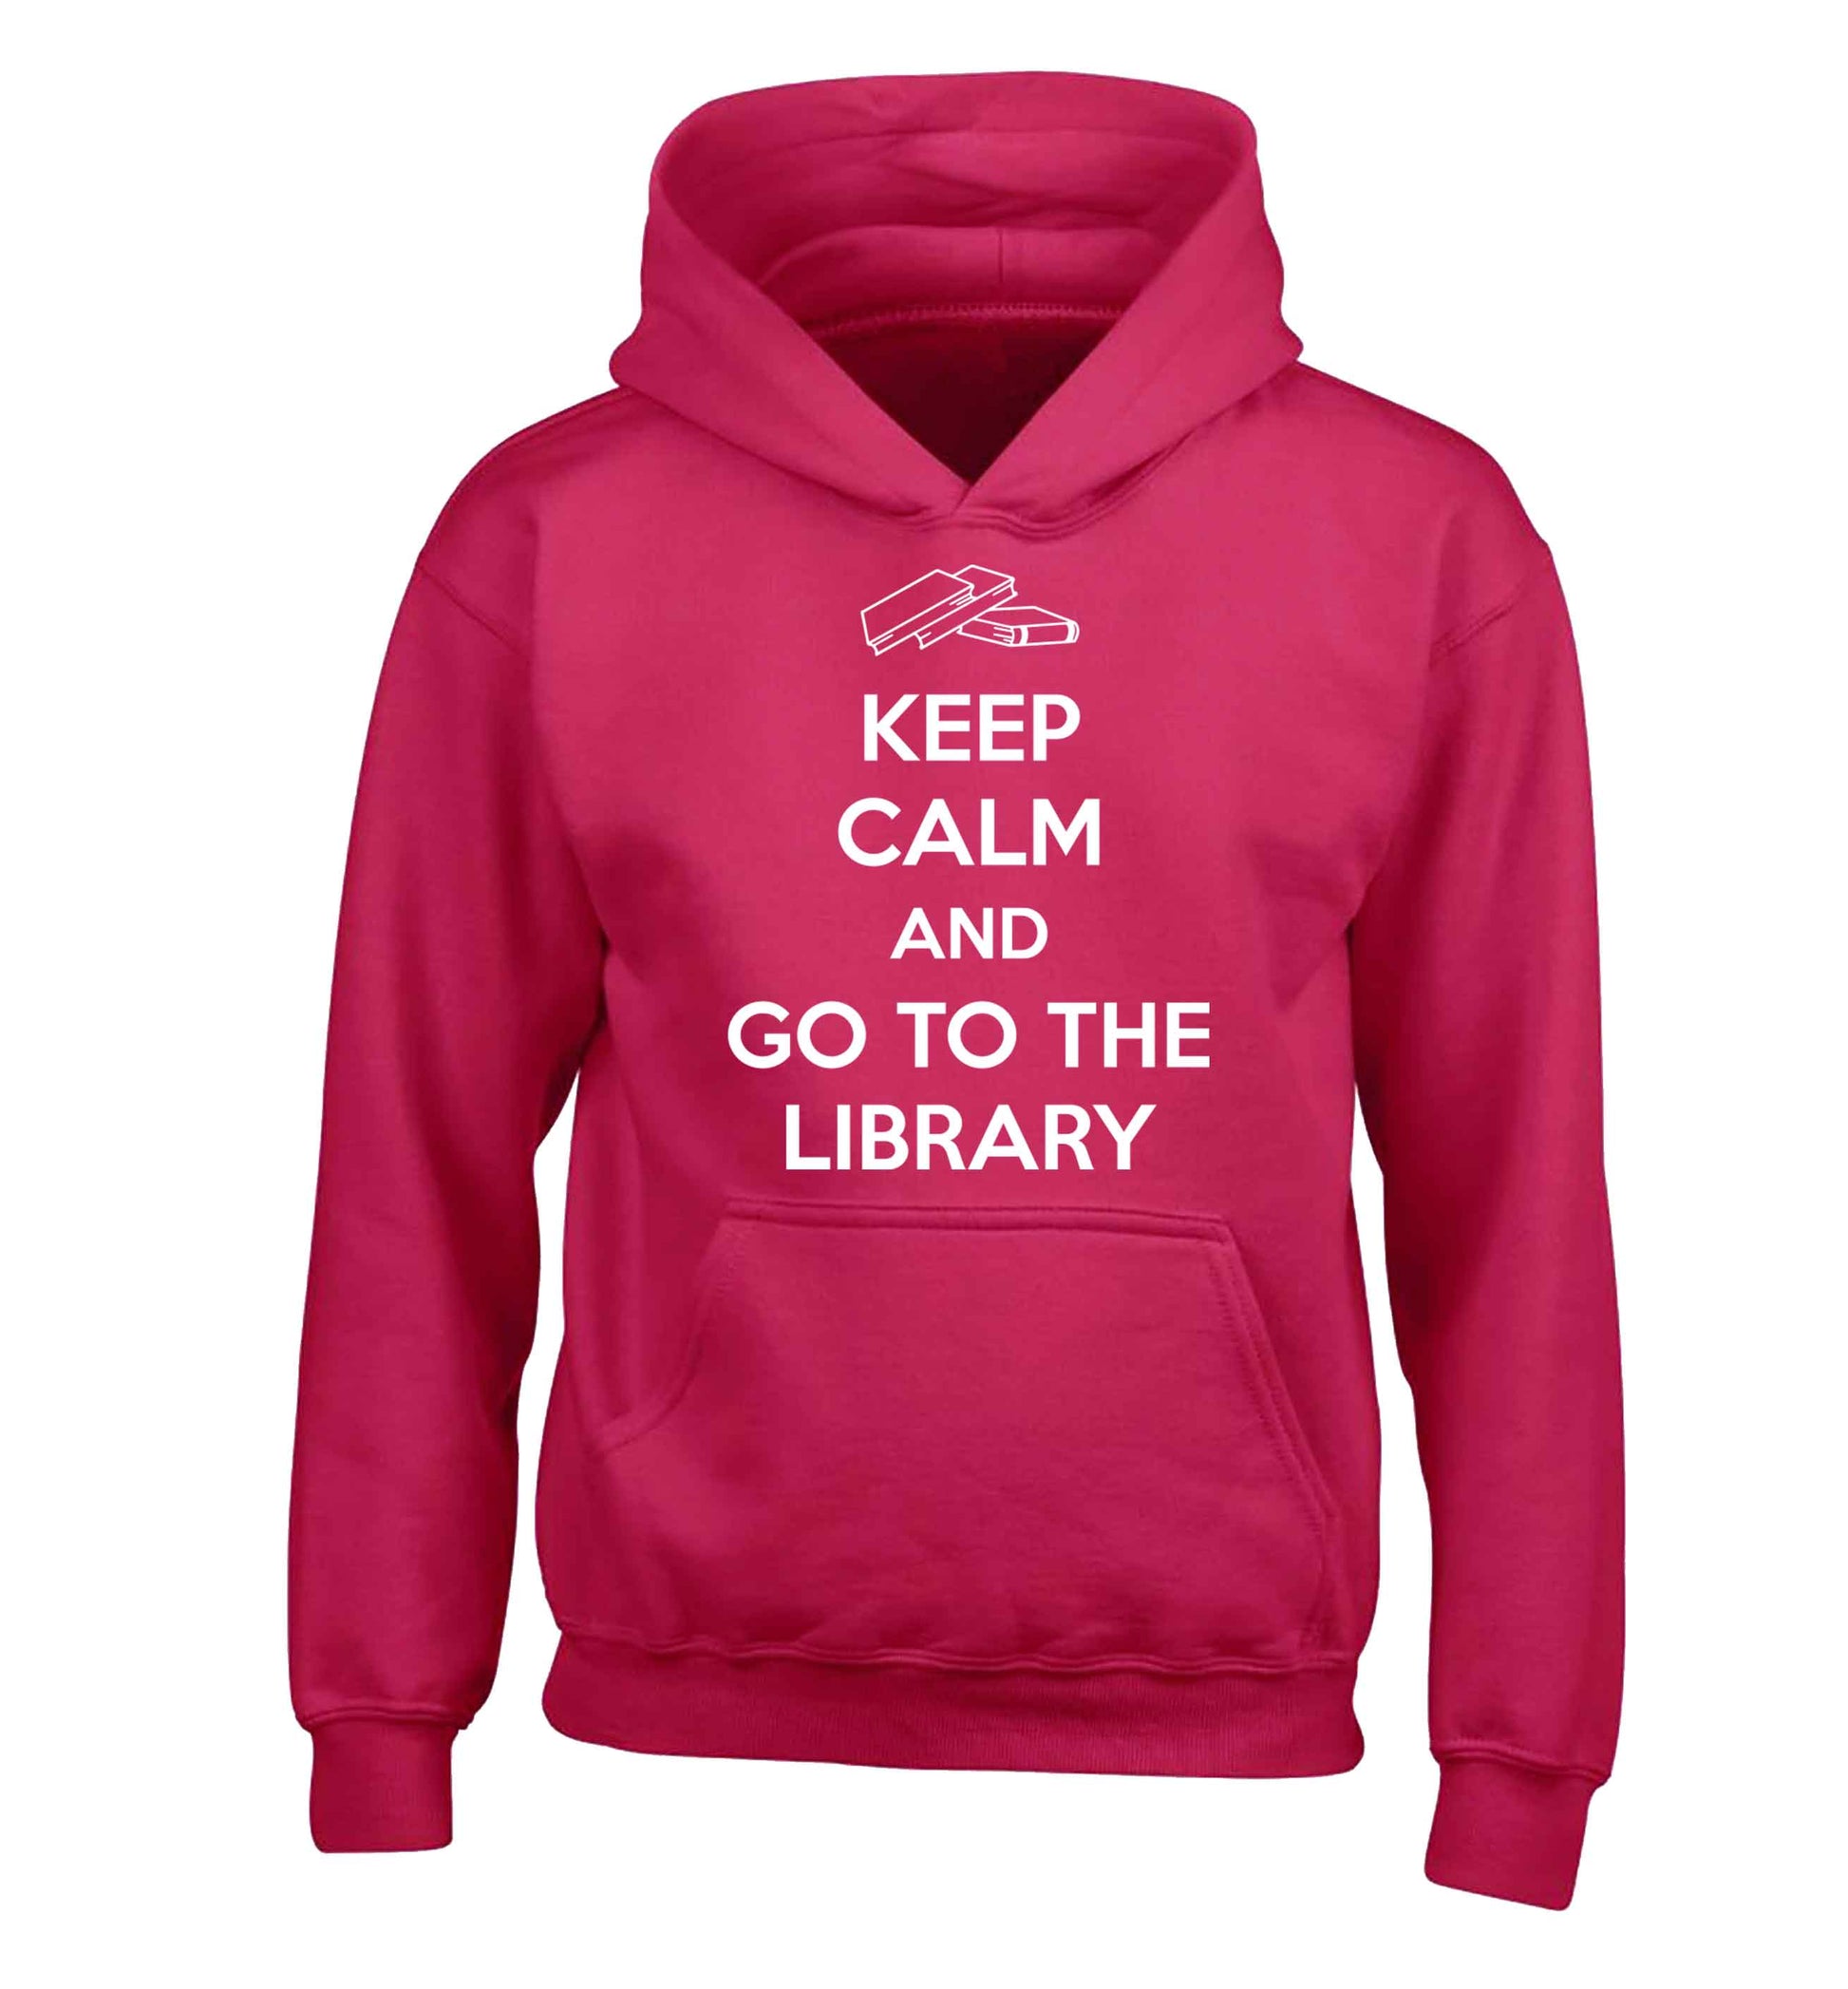 Keep calm and go to the library children's pink hoodie 12-13 Years